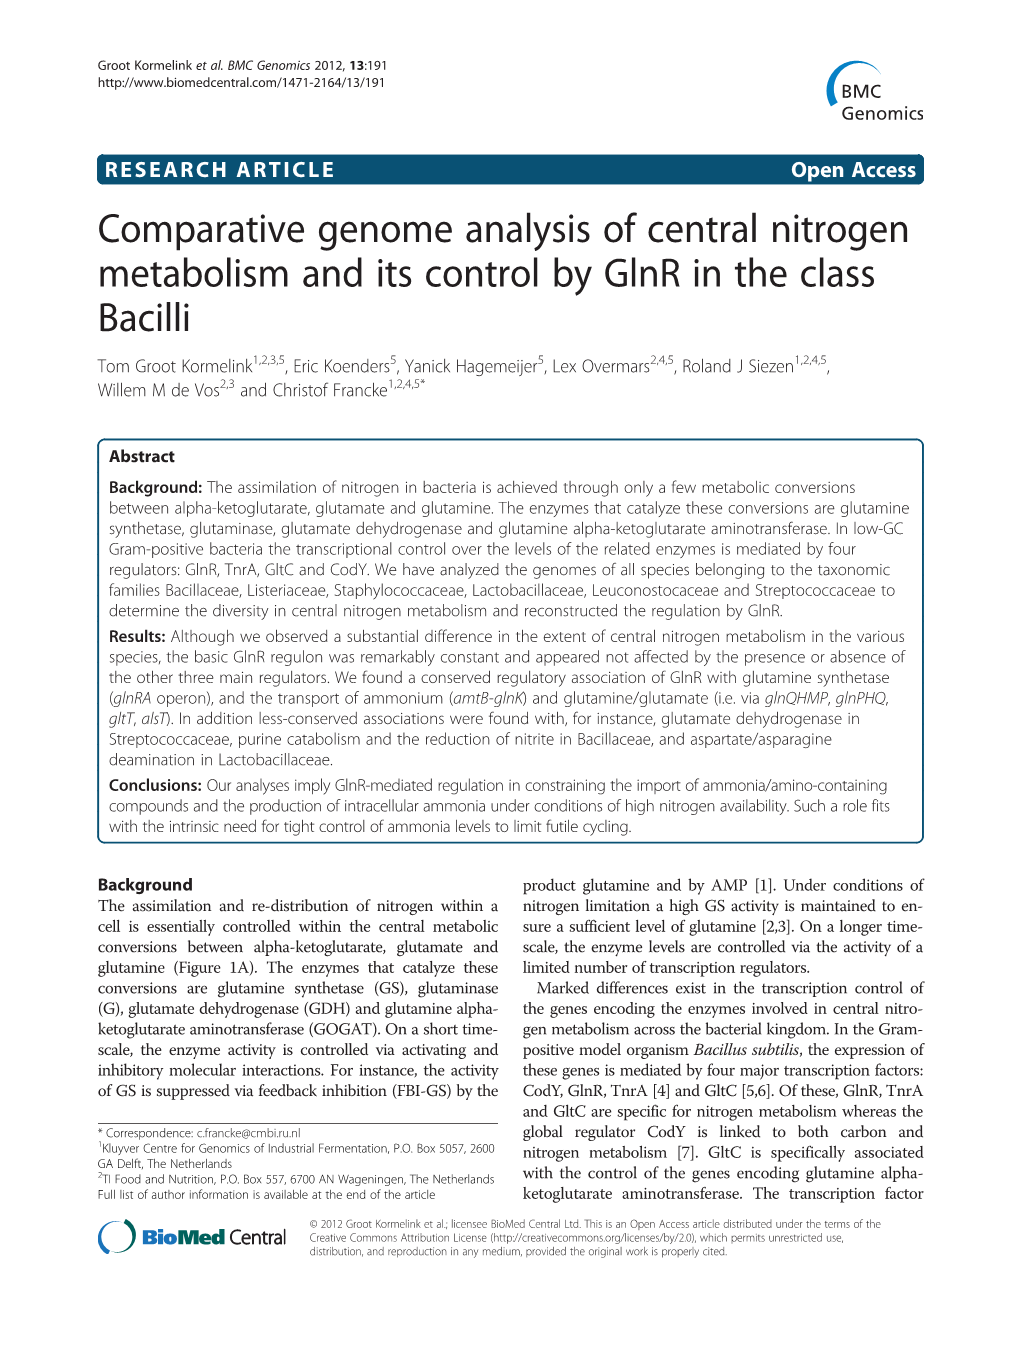 Comparative Genome Analysis of Central Nitrogen Metabolism and Its